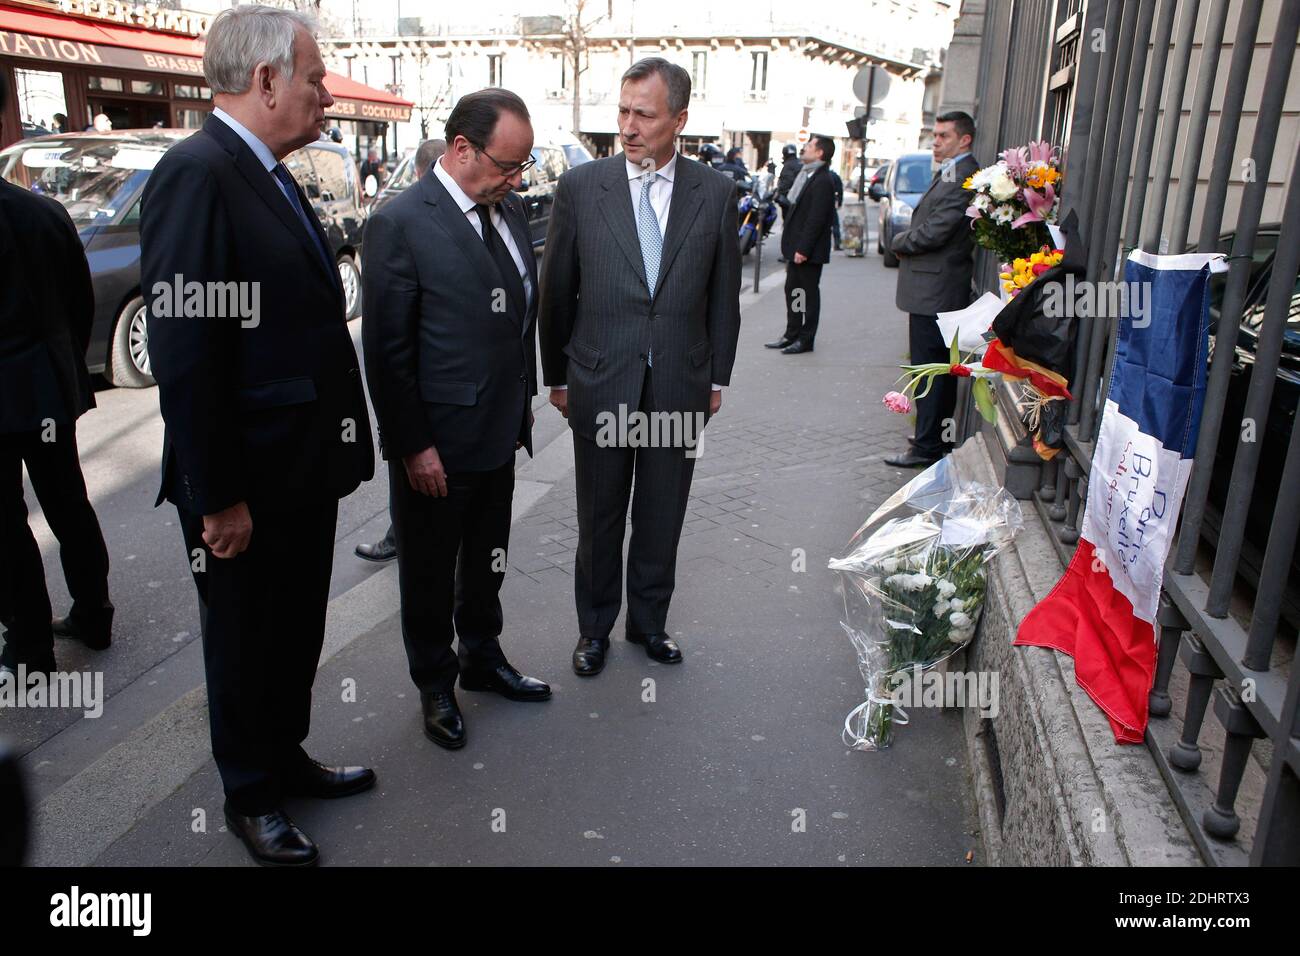 France's President Francois Hollande (C), Minister of Foreign Affairs and International Development Jean-Marc Ayrault (L) and Belgium's Ambassador to France Vincent Mertens de Wilmars pay homage to the victims of the Brussels terror attacks outside the Belgium embassy in Paris, France on Tuesday, March 22, 2016. Bombs exploded at the Brussels airport and one of the city's metro stations earlier today, killing at least 34 and injuring dozens of people. The Islamic State group claimed responsibility for the attacks. Photo by Thibault Camus/Pool/ABACAPRESS.COM Stock Photo